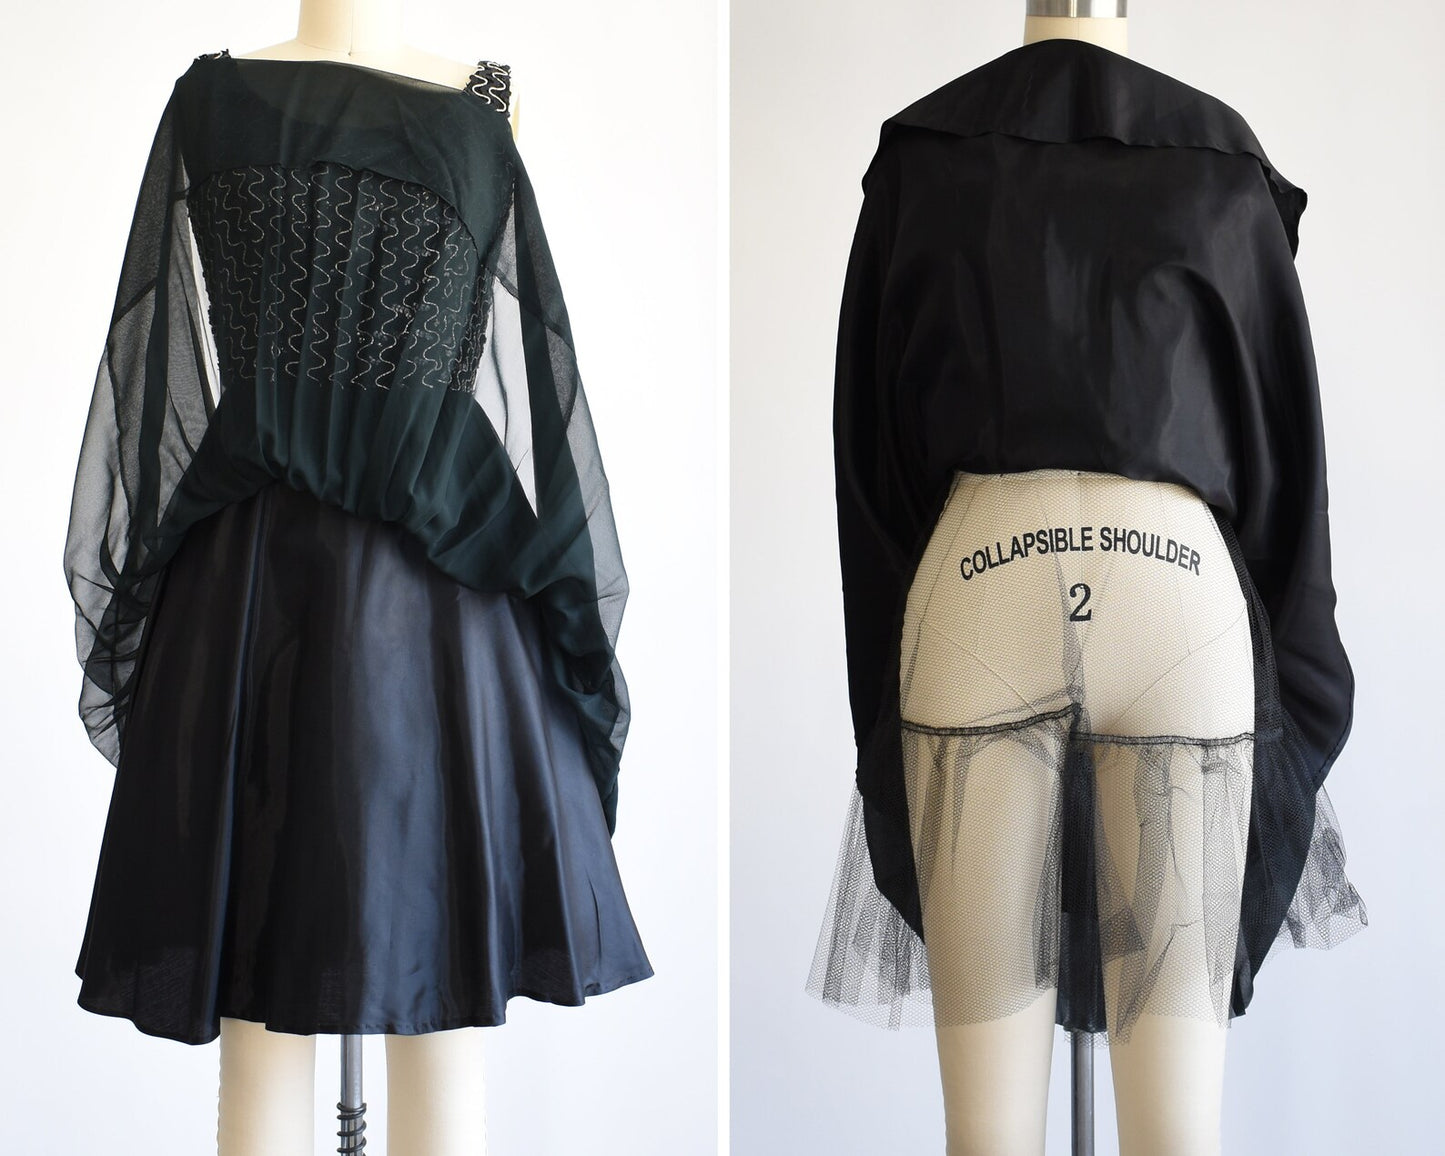 side by side view of the layered skirt. under the chiffon is a black acetate fabric and under that is black tulle netting